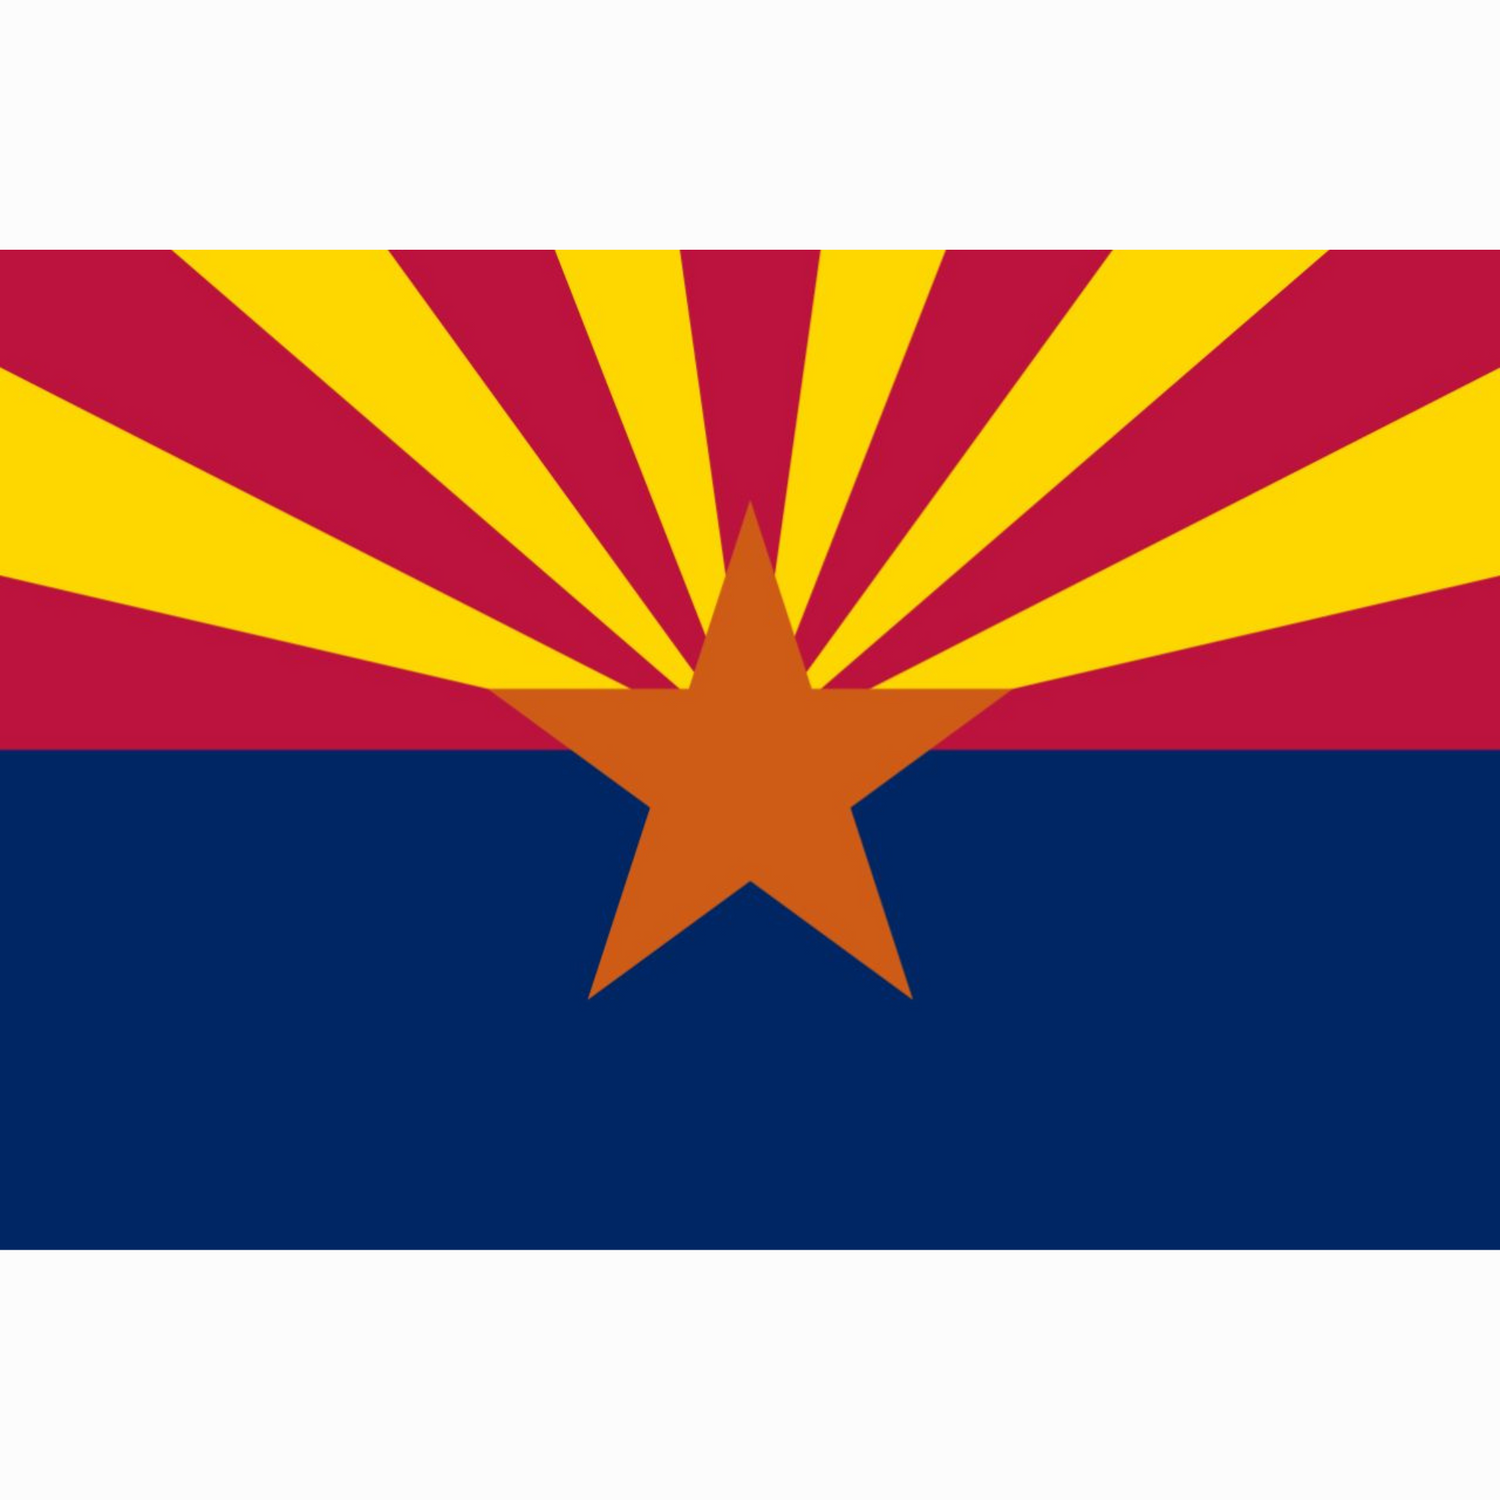 The official state flag of Arizona was adopted in 1917 and showcases 13 sun rays, alternating red and gold,  and a blue field on the lower half. - History By Mail